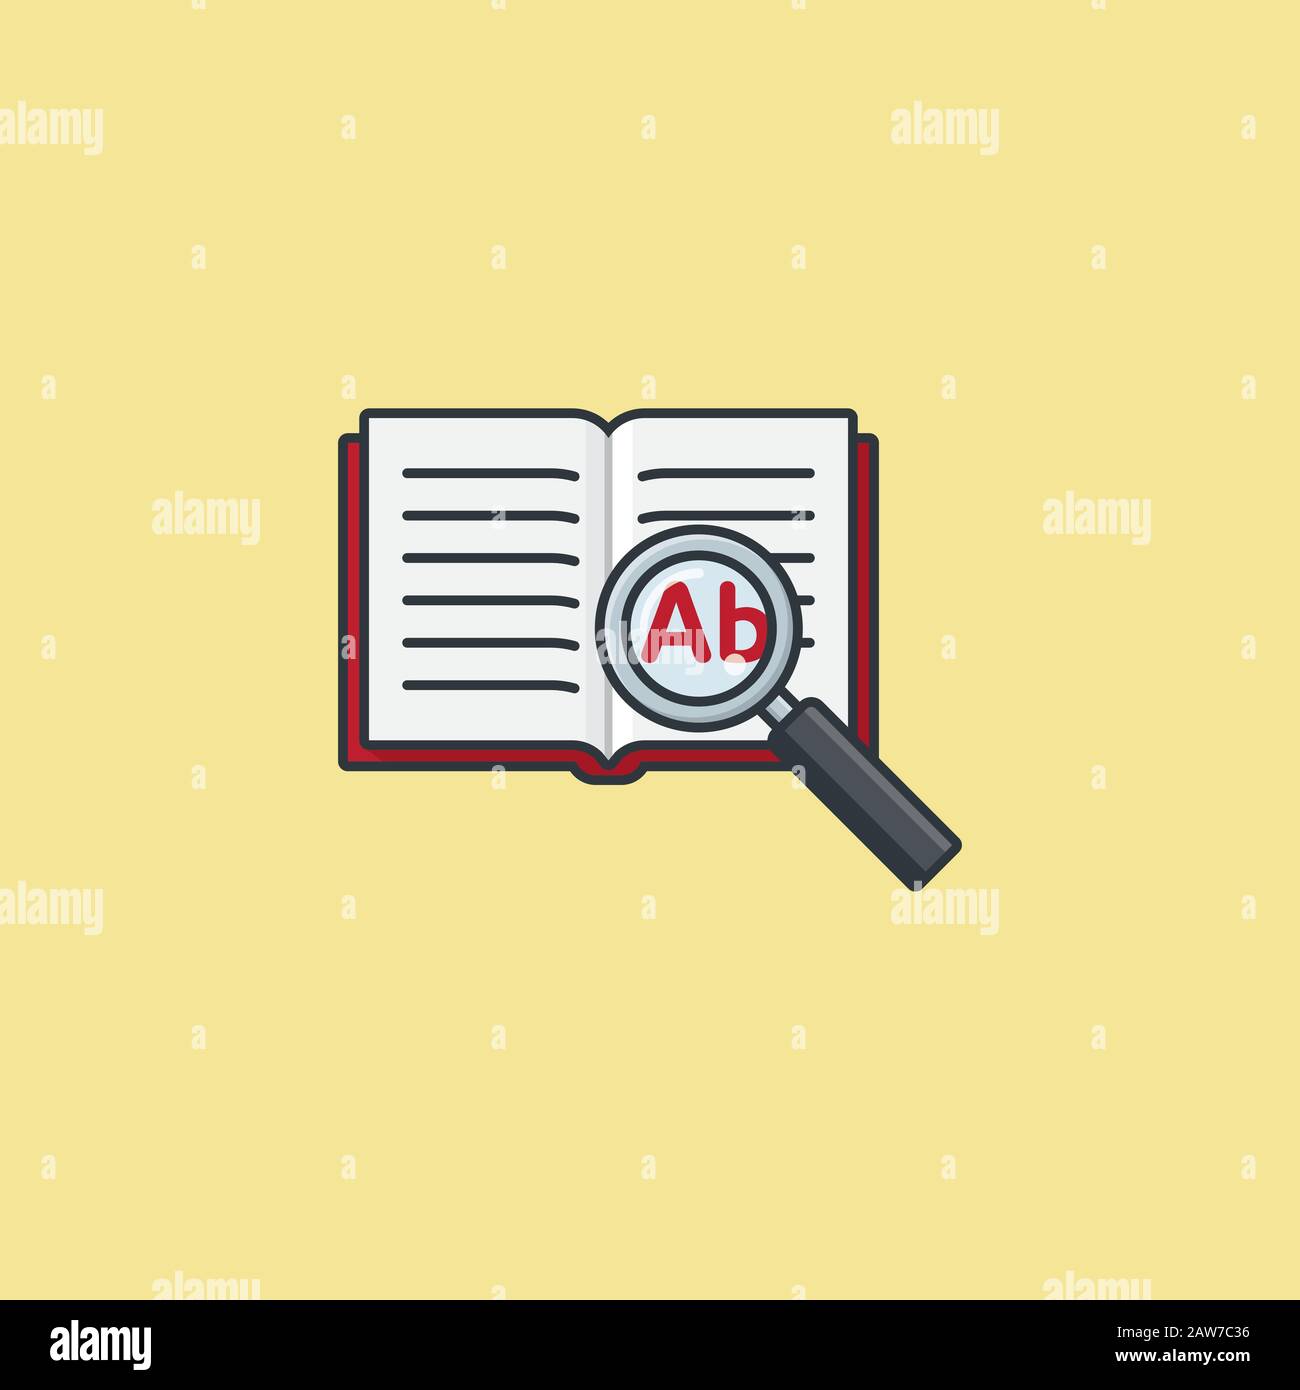 Thesaurus or encyclopedia with magnifying glass, color vector illustration for Thesaurus Day on January 18. Knowledge, learning and education icon. Stock Vector